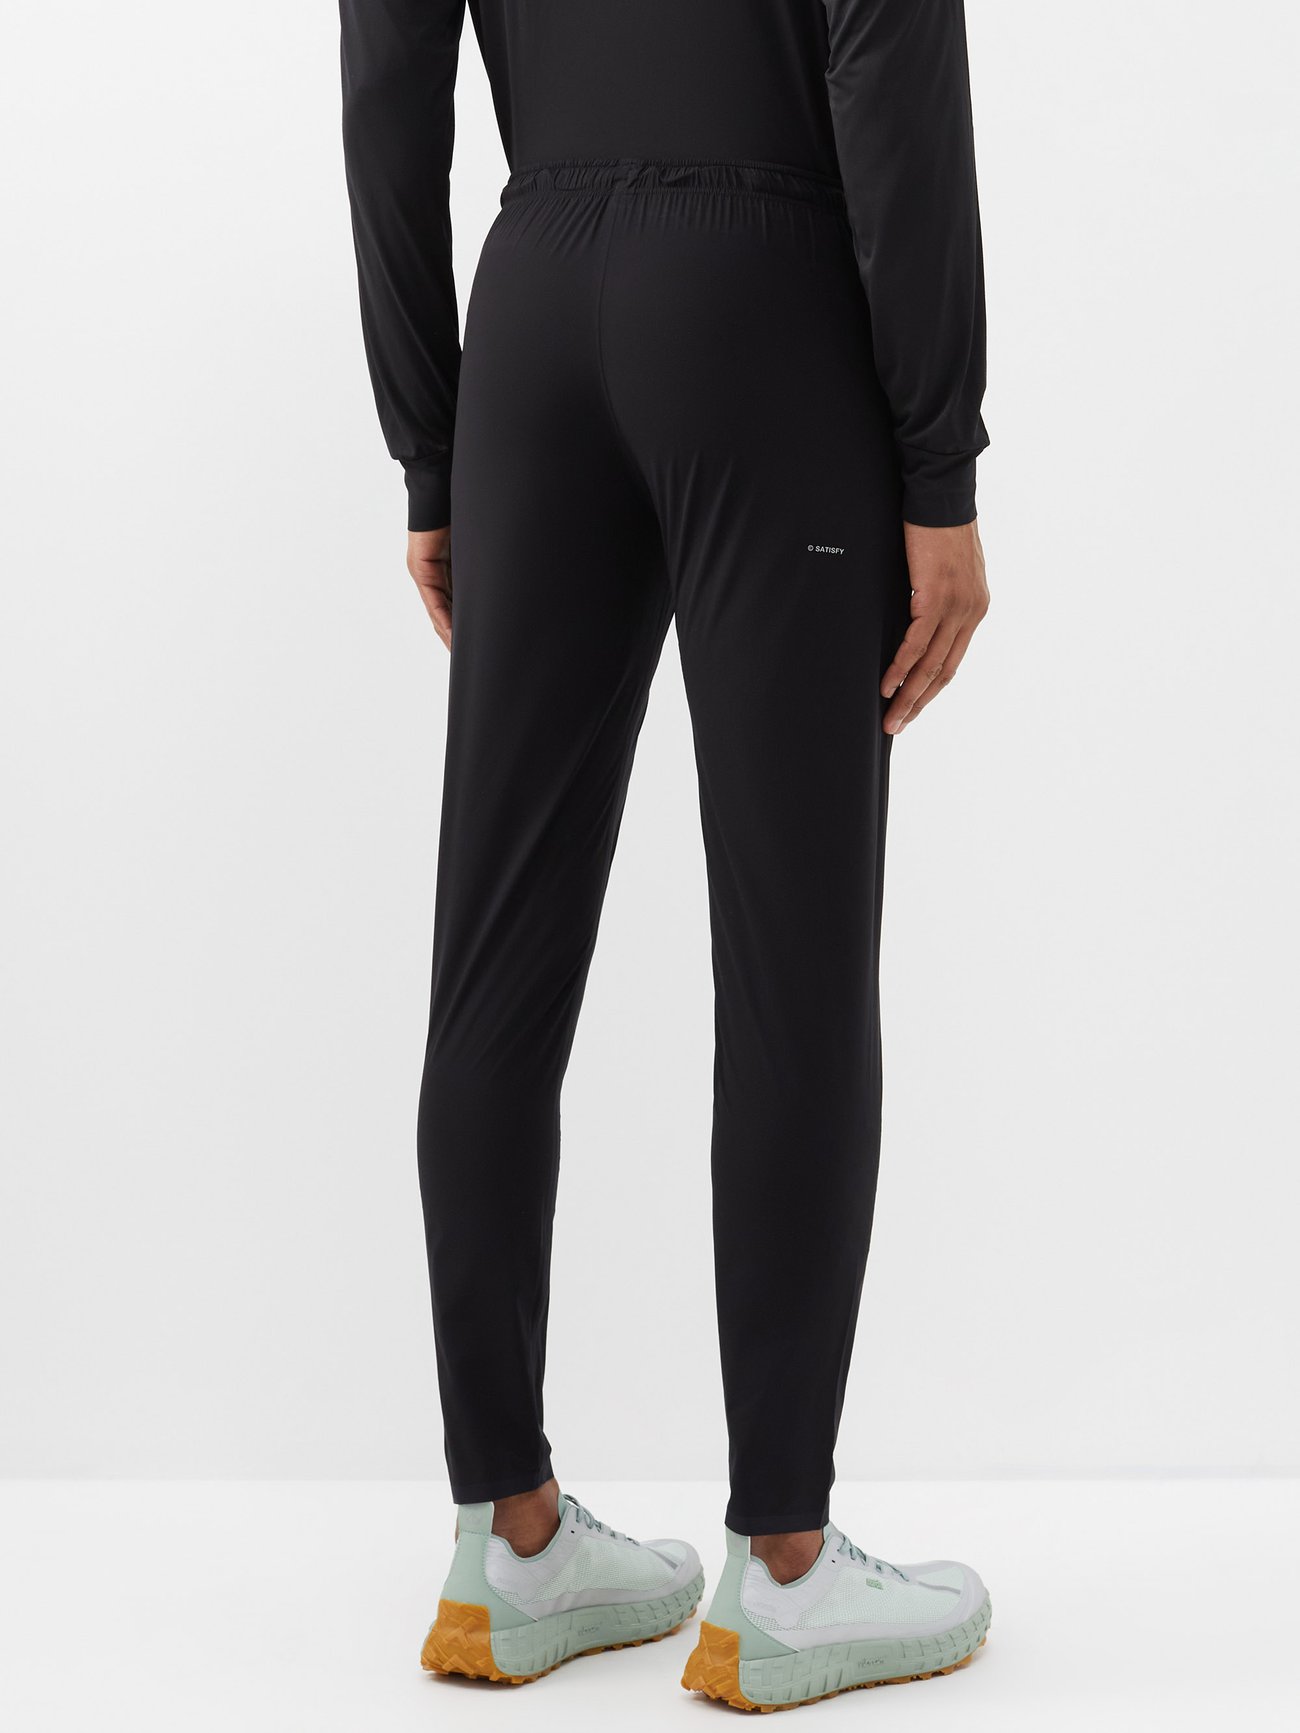 Black Justice shell track pants, Satisfy